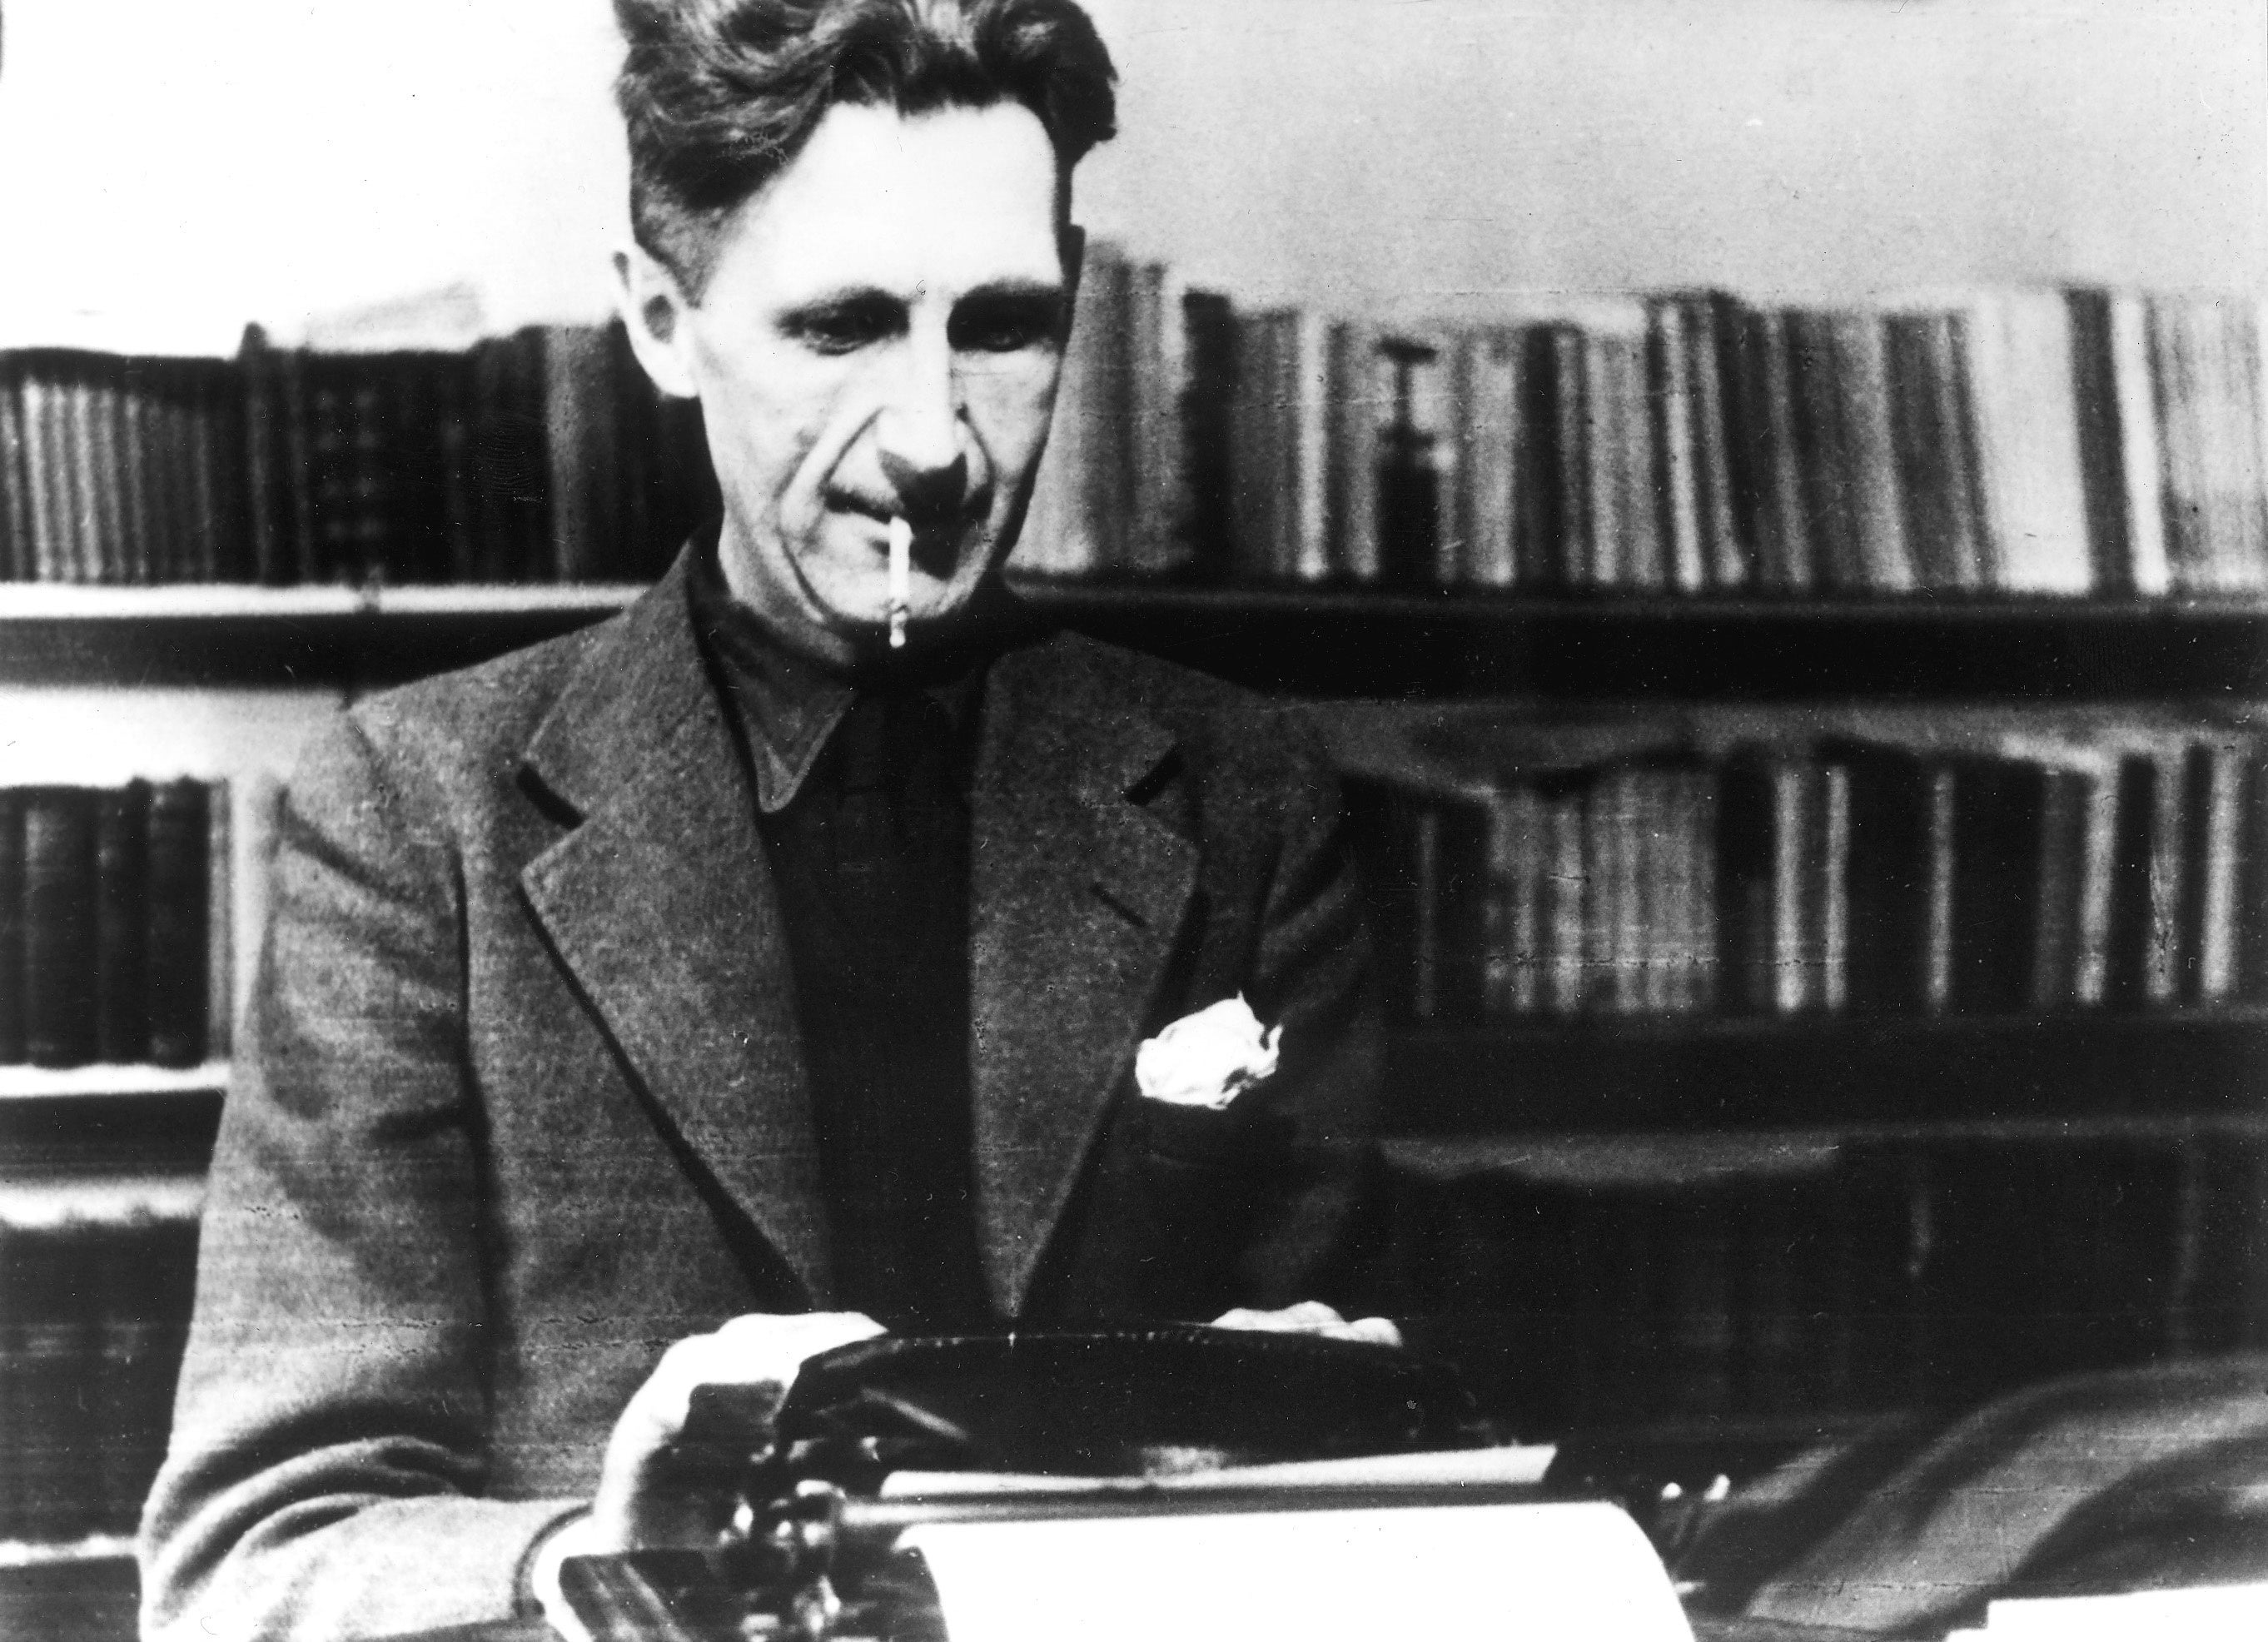 the essays by george orwell